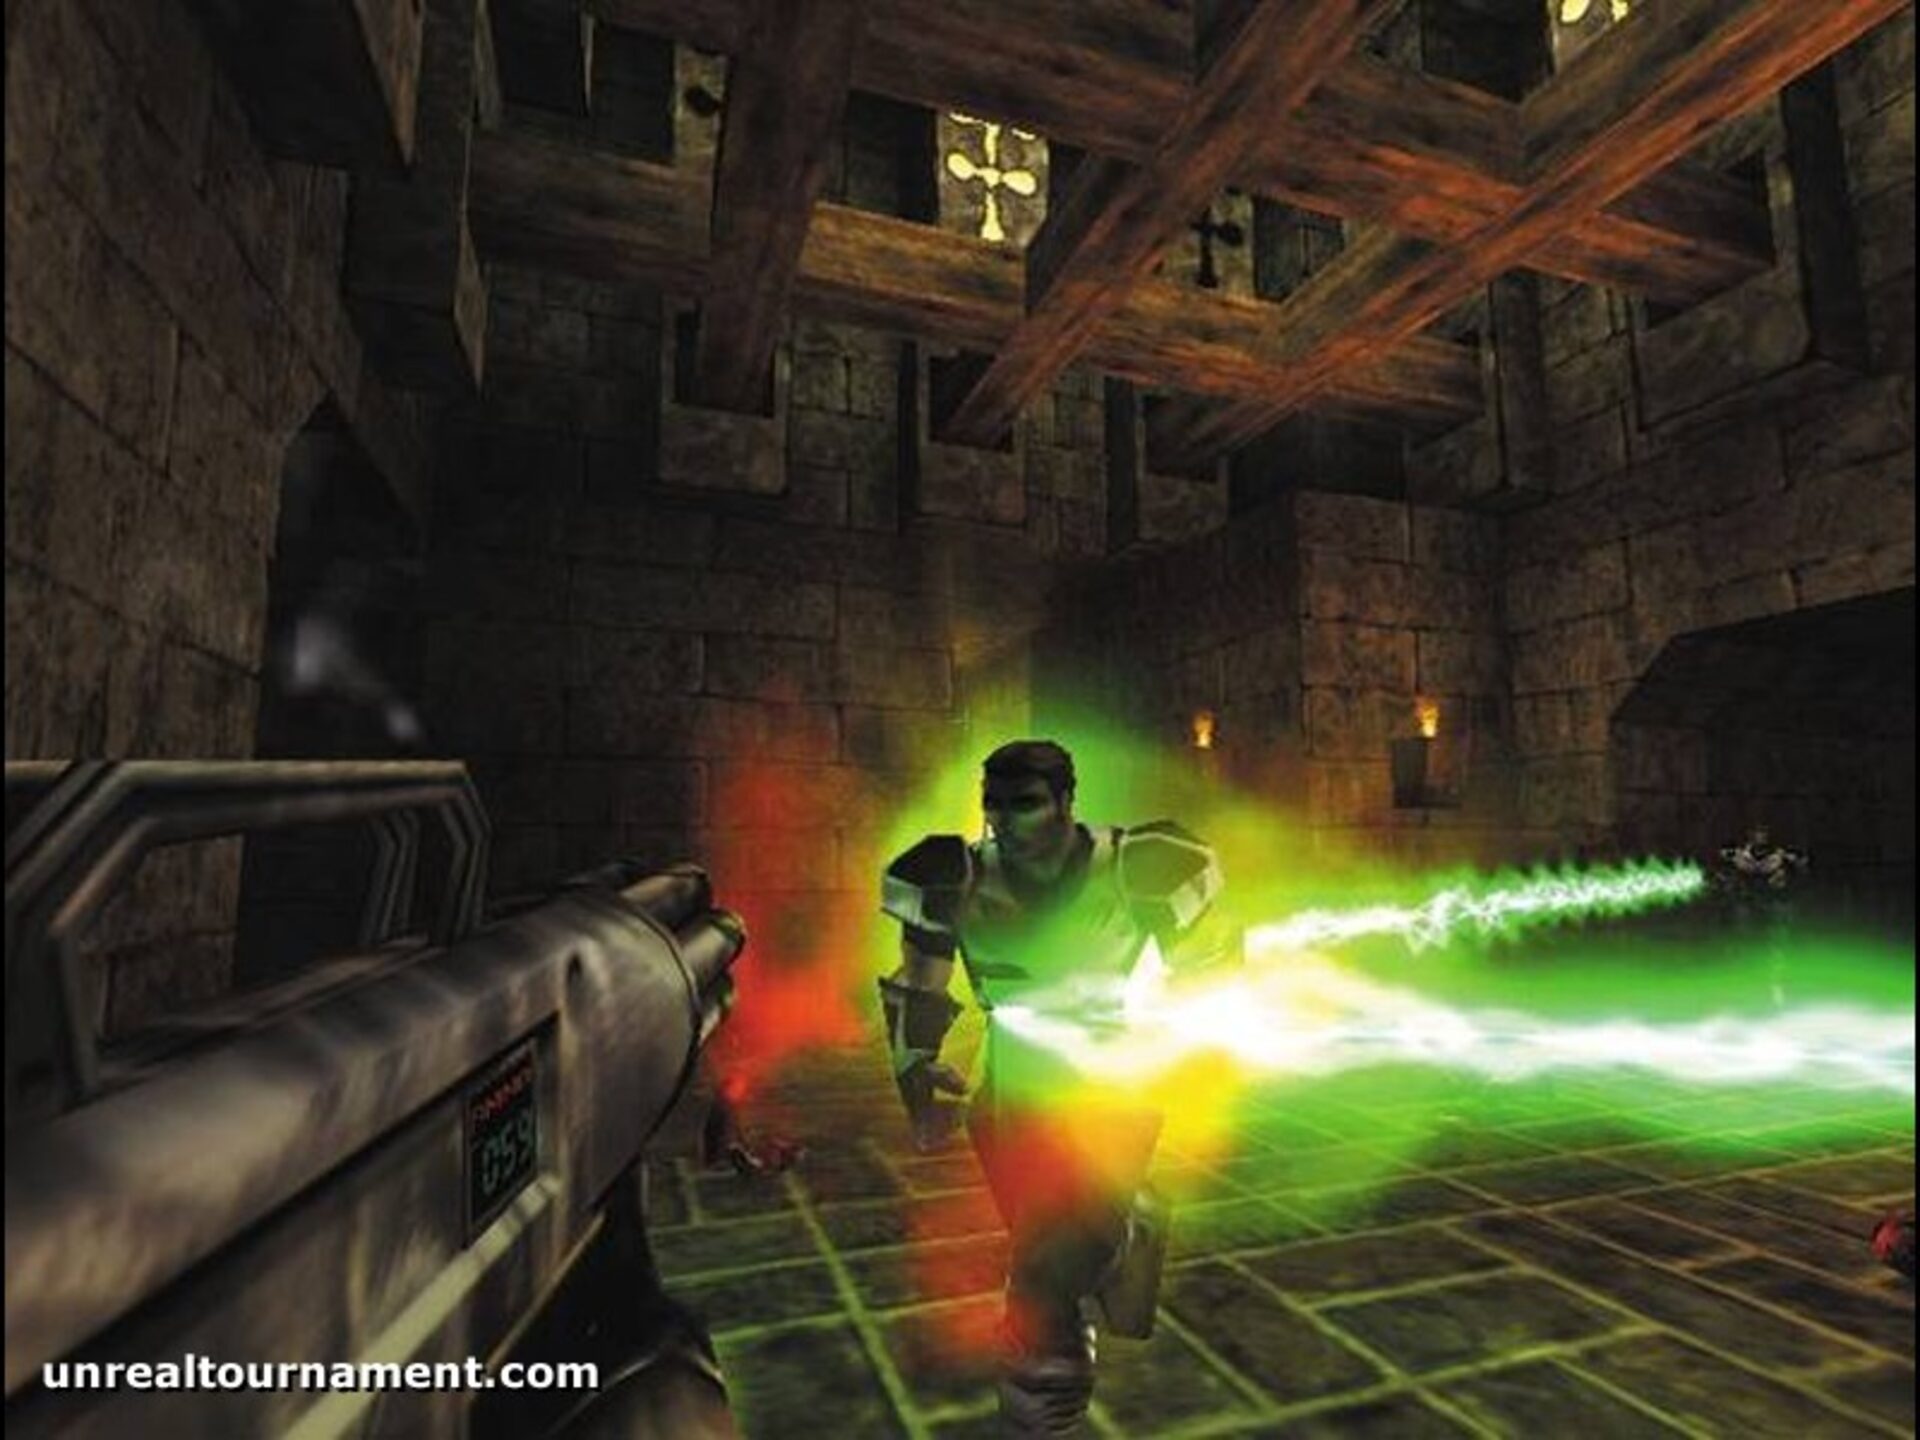 Unreal tournament 2004 on steam фото 63